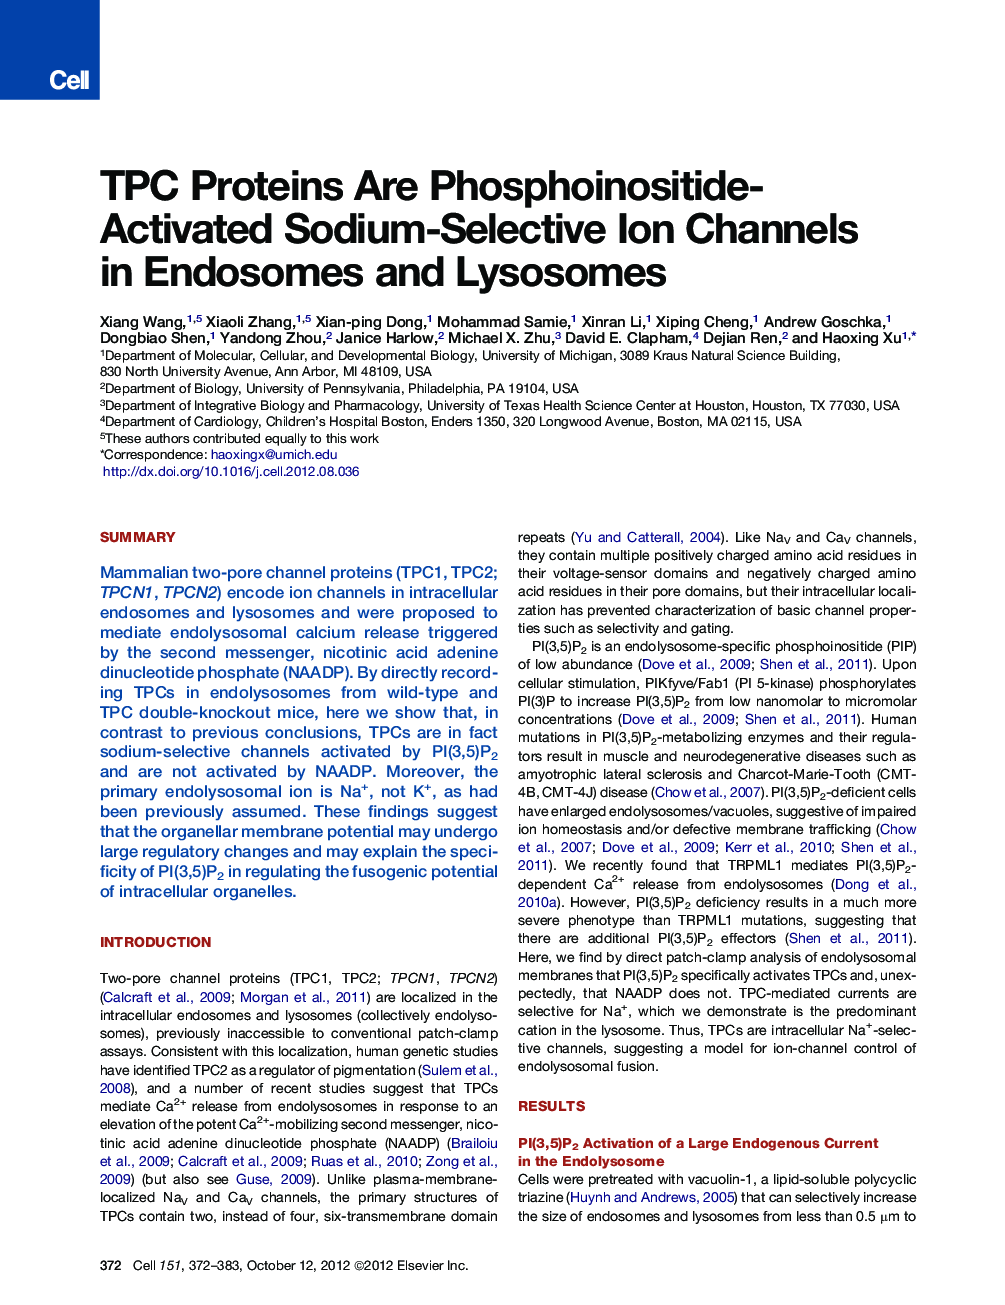 TPC Proteins Are Phosphoinositide- Activated Sodium-Selective Ion Channels in Endosomes and Lysosomes